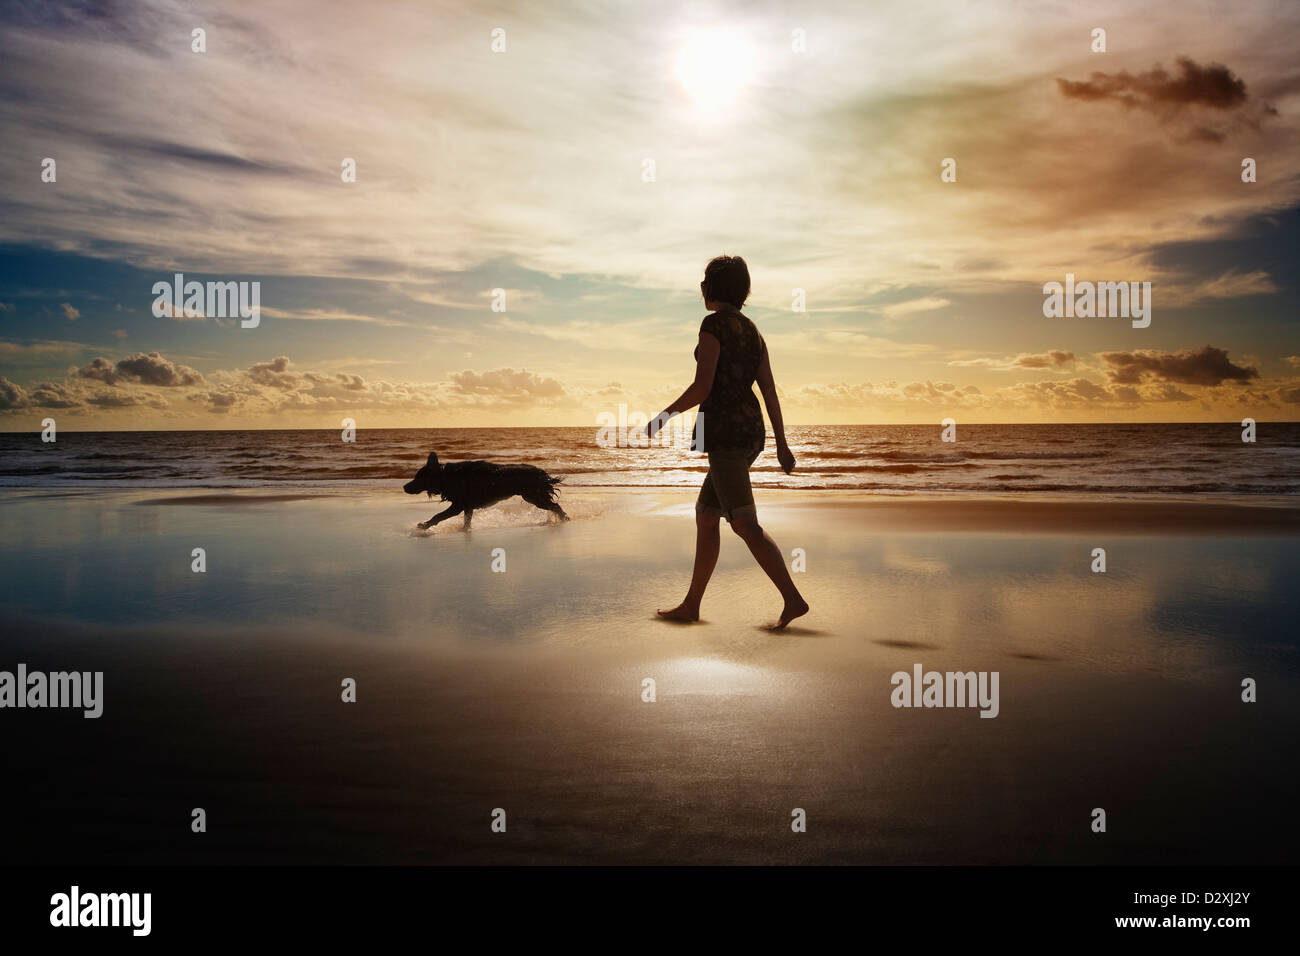 Silhouette of woman and dog walking on beach Banque D'Images